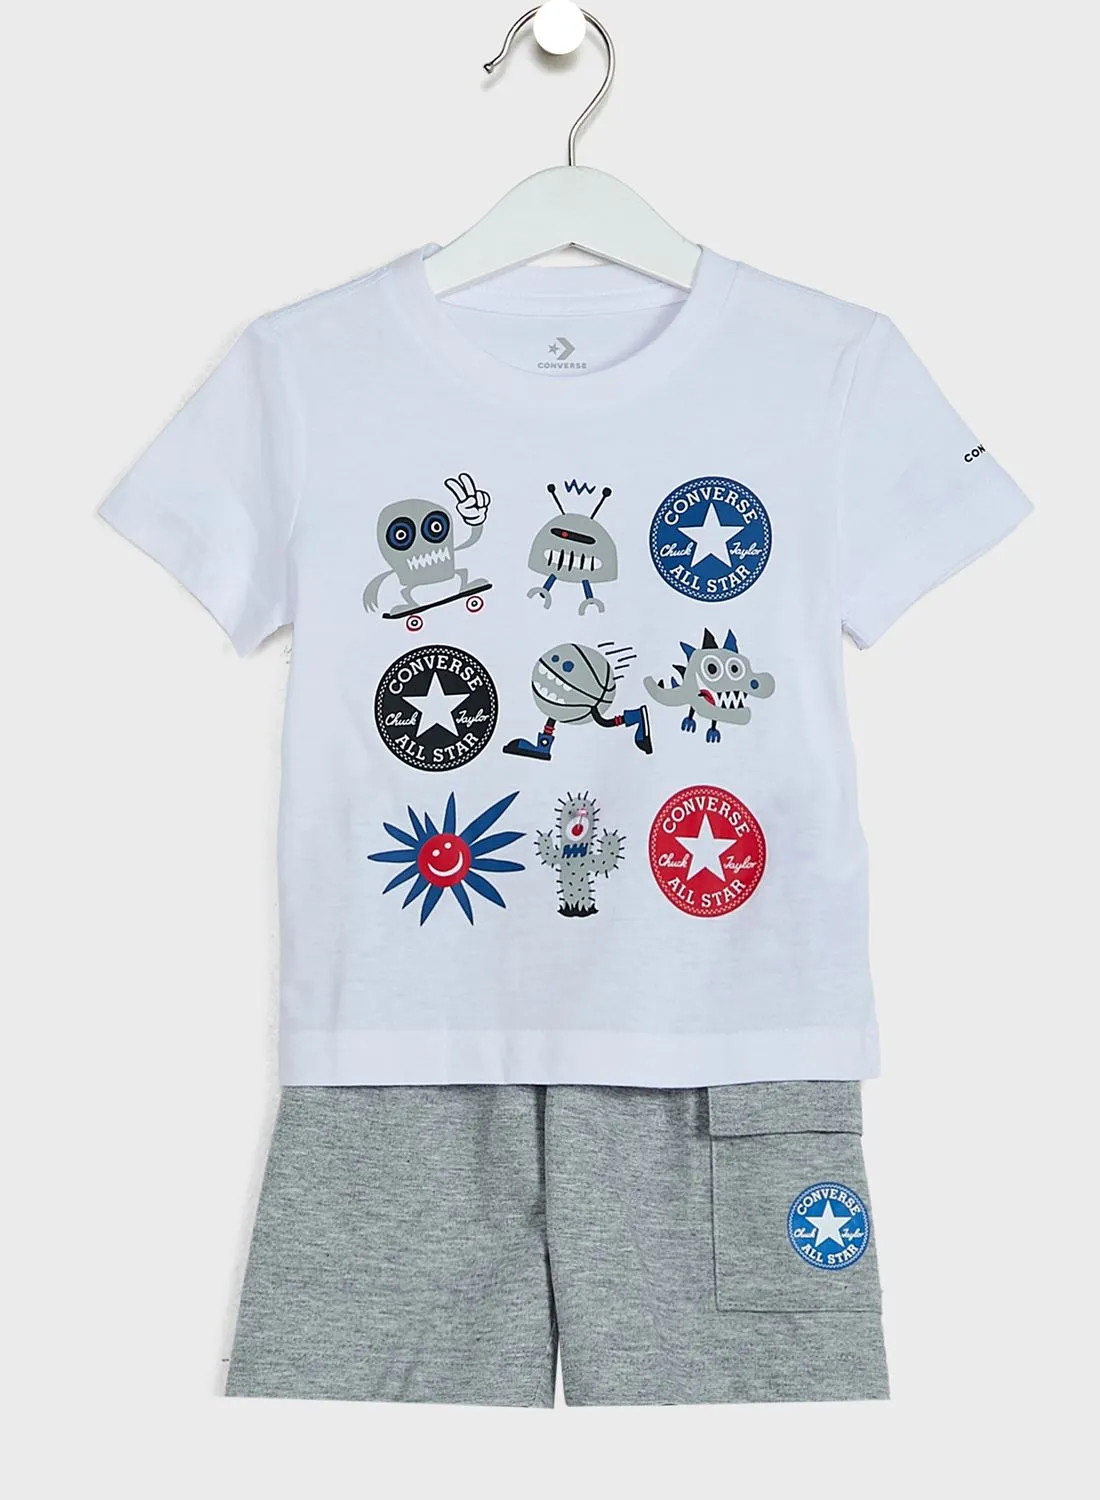 CONVERSE Infant Distorted Cargo Shorts Set